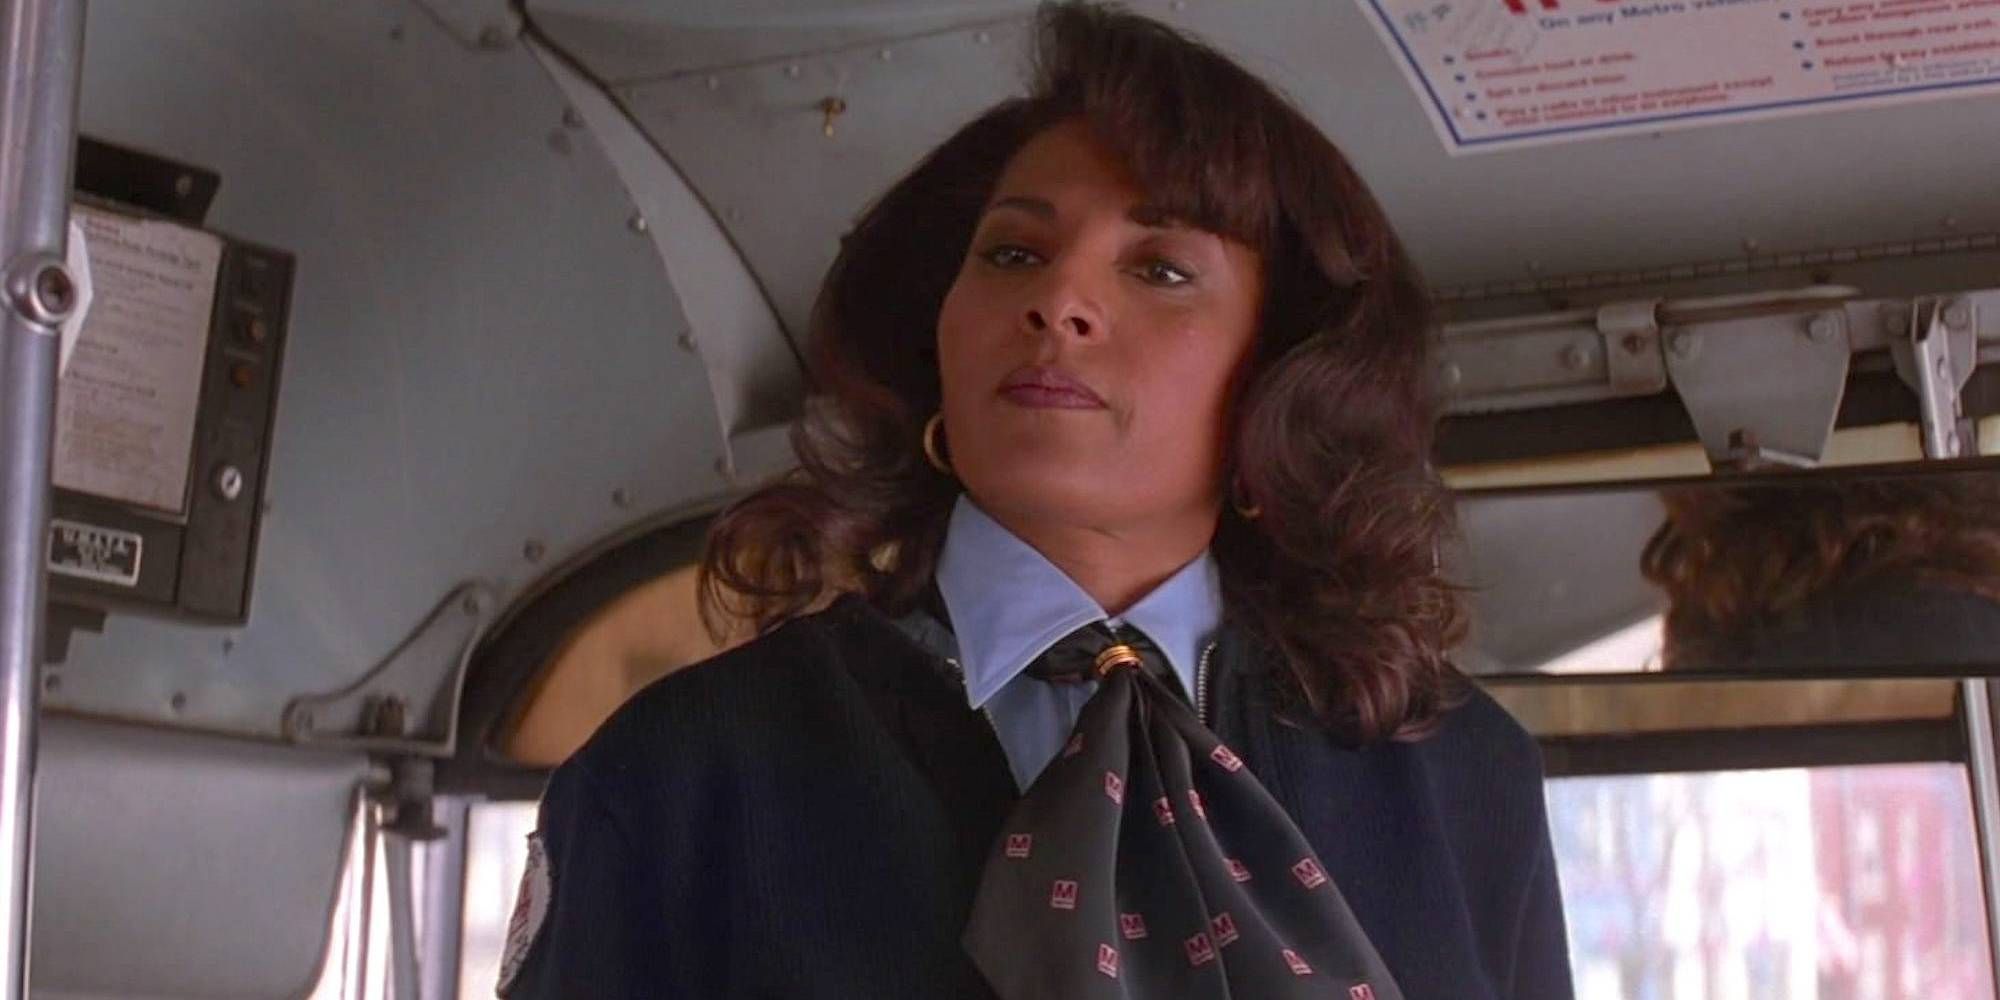 Pam Grier looking at someone off-camera while standing up inside a bus in Mars Attacks!